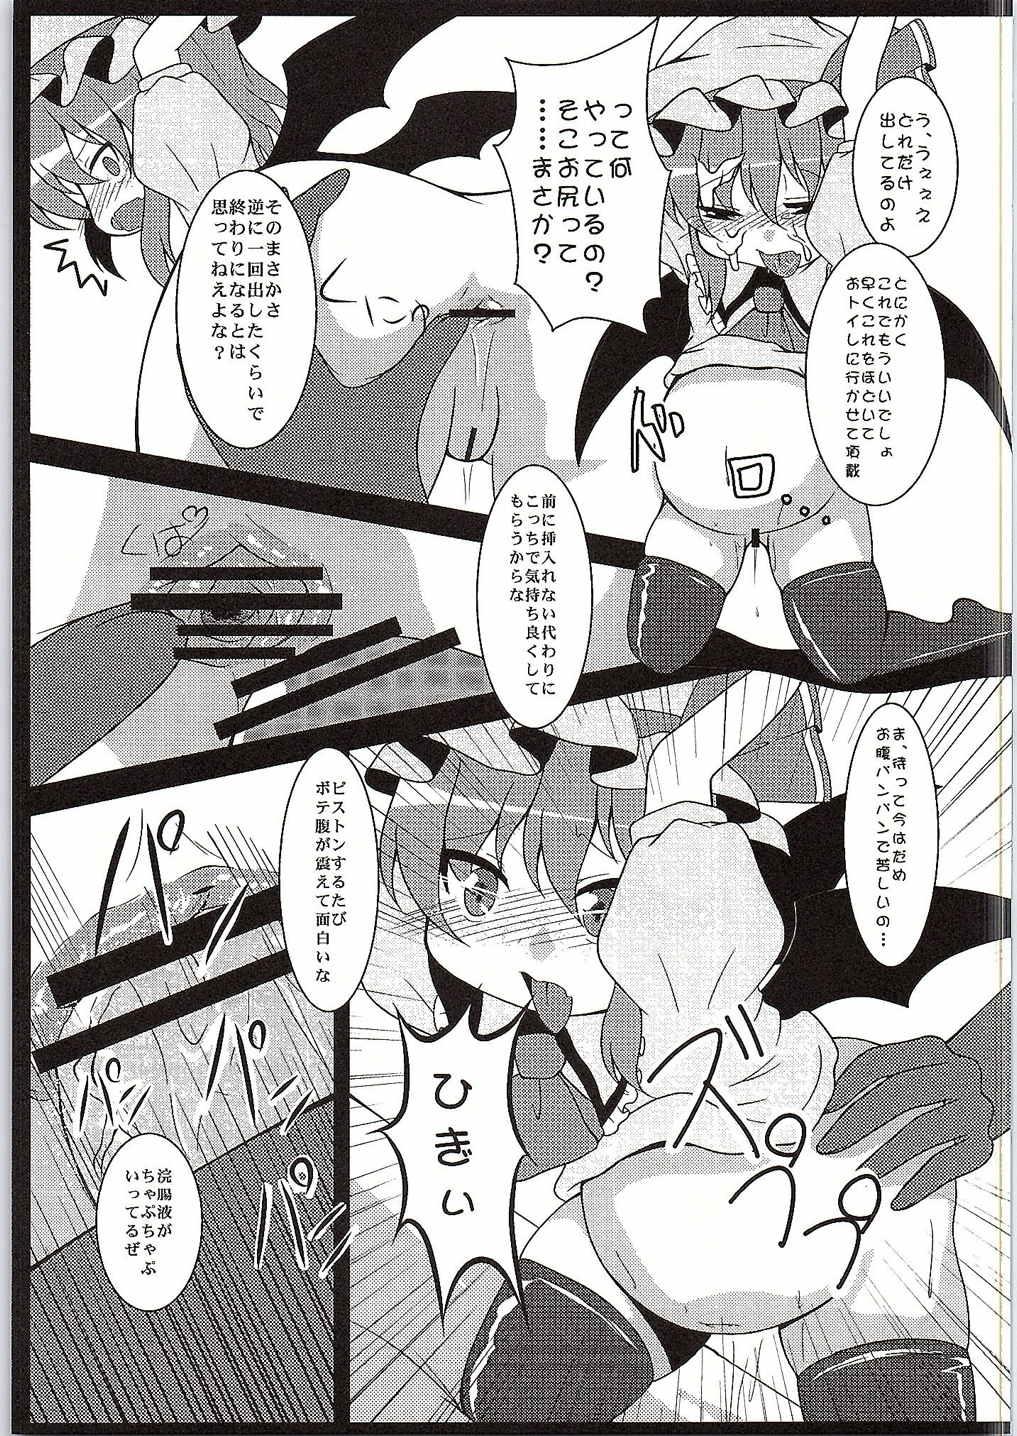 Wet Pussy conformable with your desire - Touhou project Gemidos - Page 6